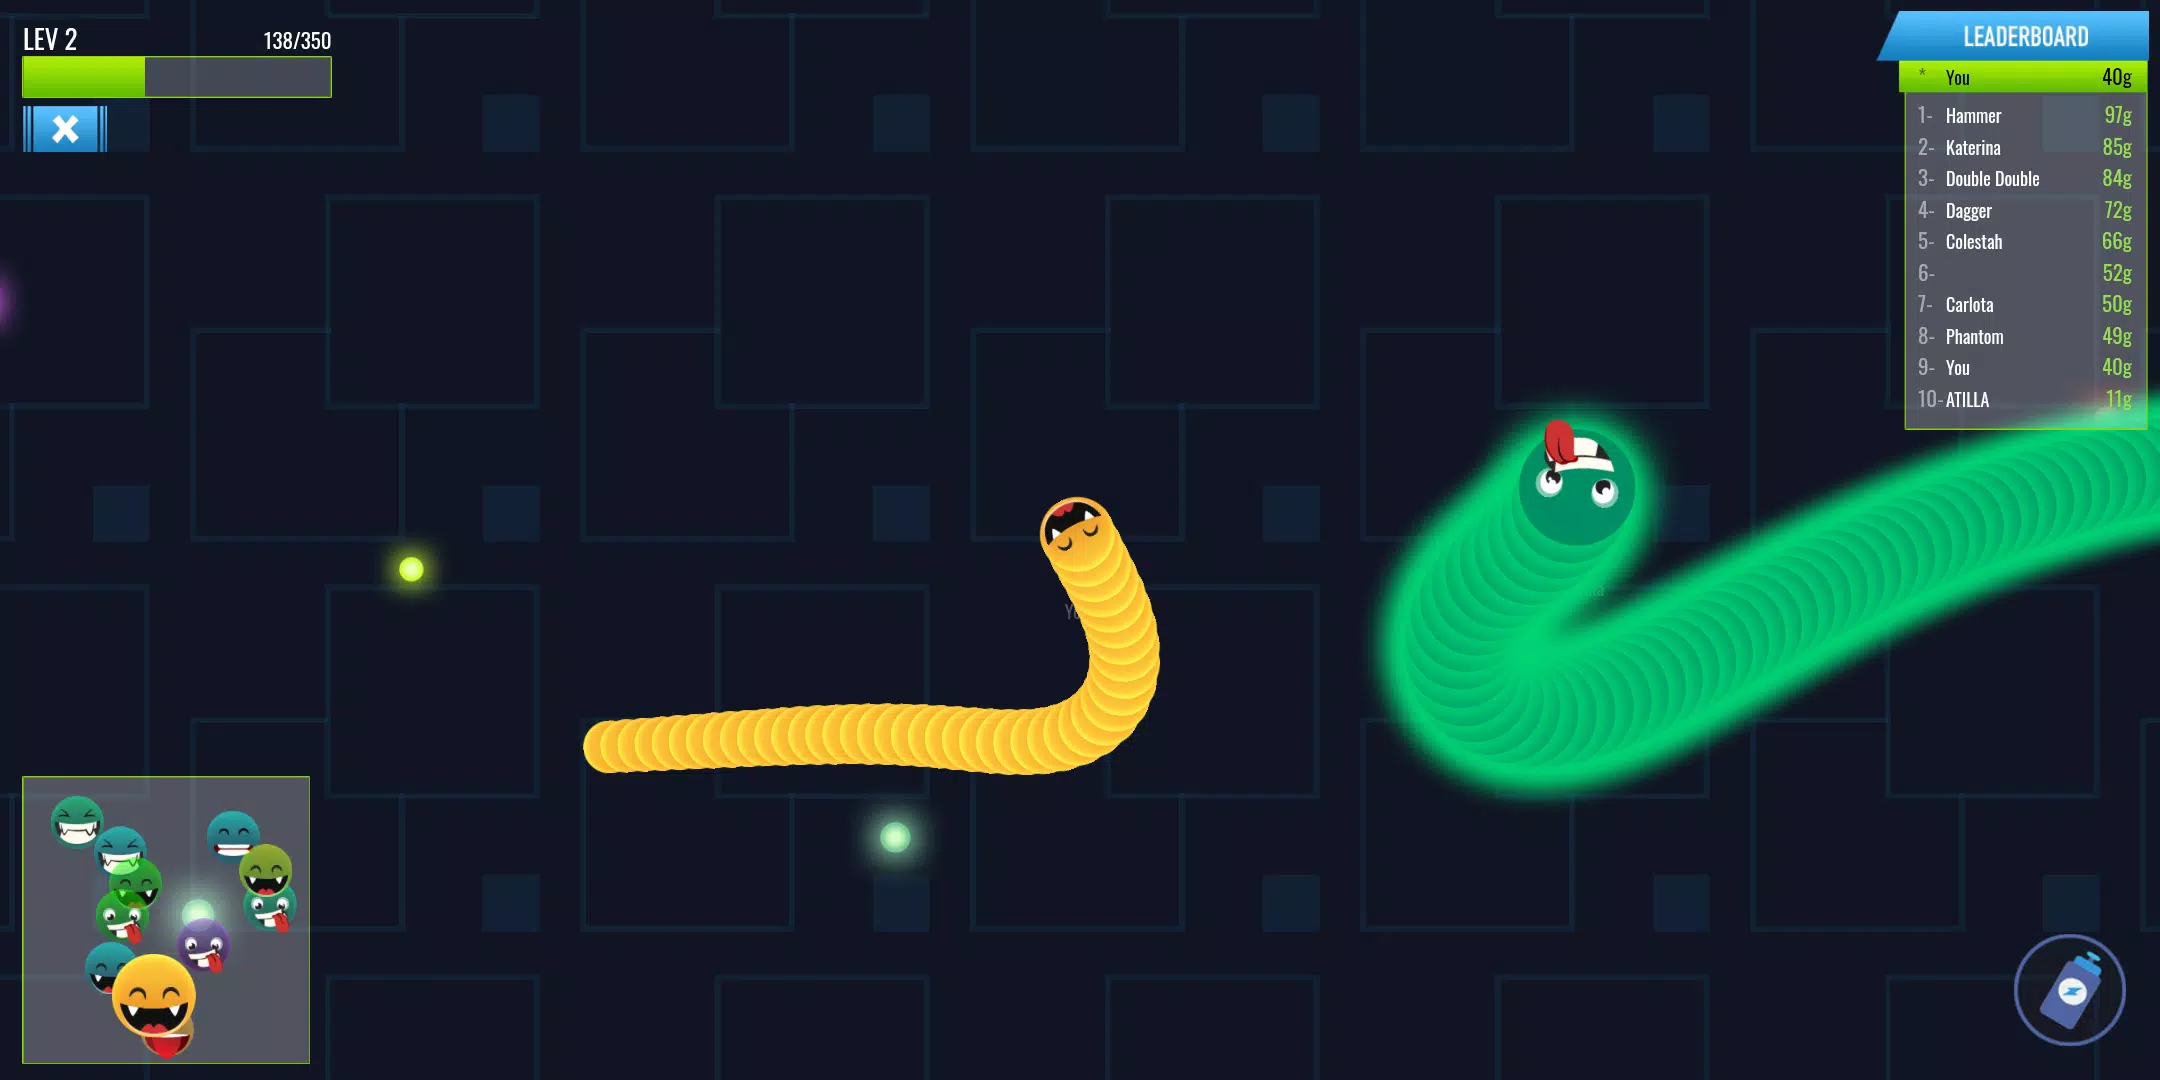 HAPPY SNAKES - Online Browser Game - 1ST PLACE 